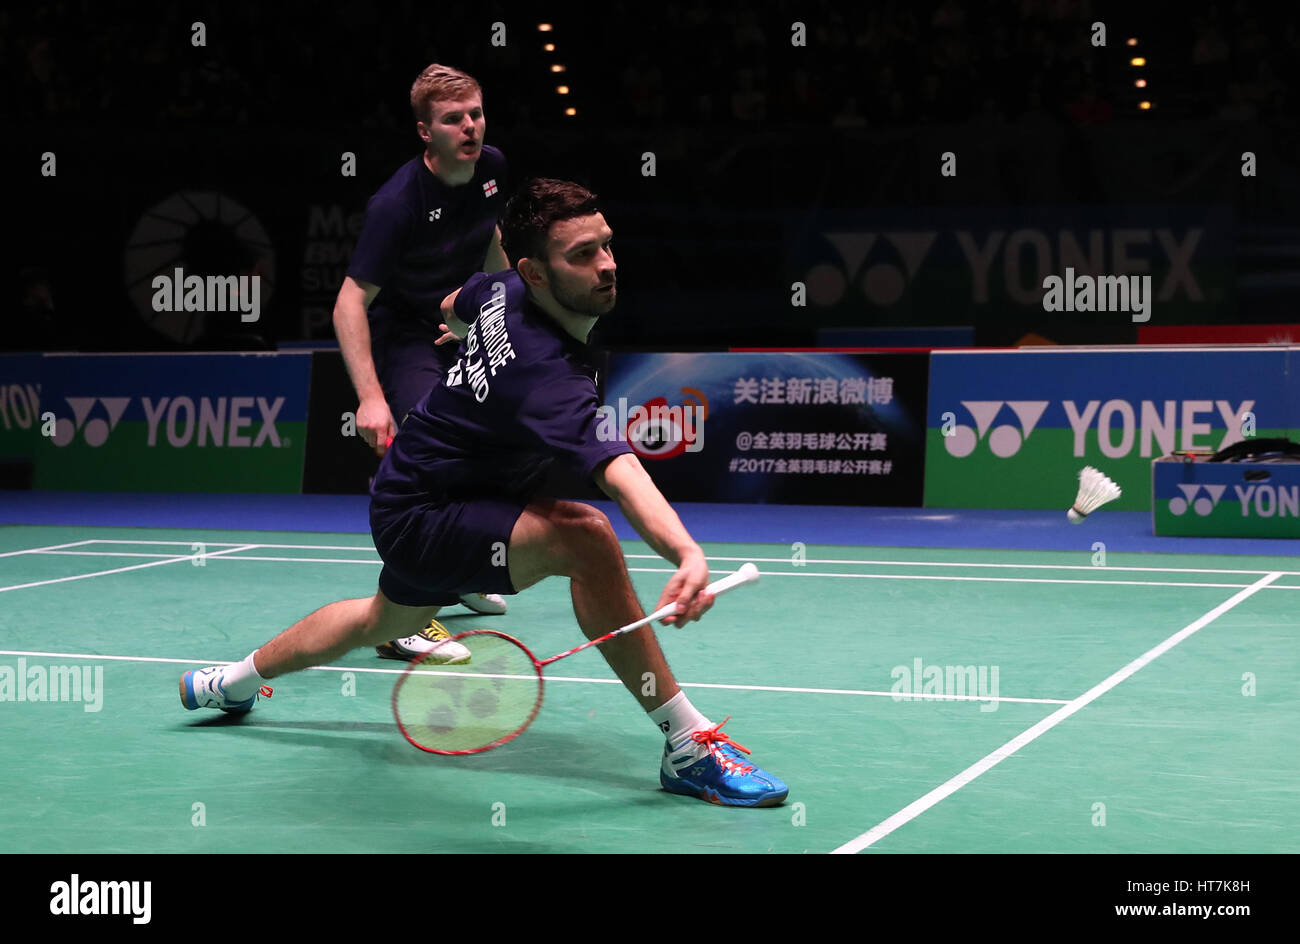 England's Chris Langridge (front) Marcus Ellis in action during the Men's doubles match during day two of the YONEX All England Open Badminton Championships at the Barclaycard Arena, Birmingham. Stock Photo